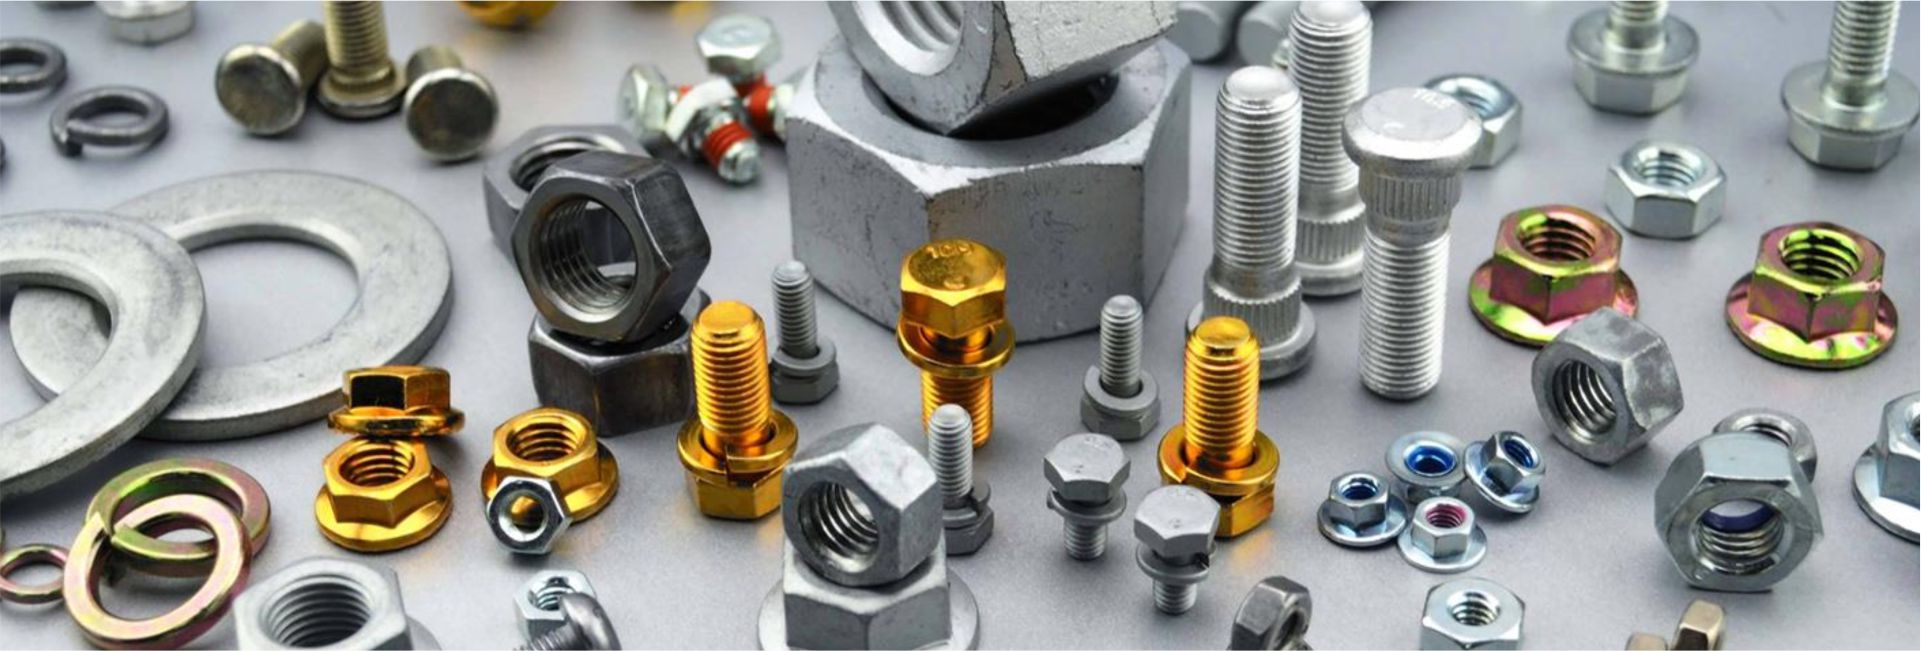 nuts and bolts suppliers